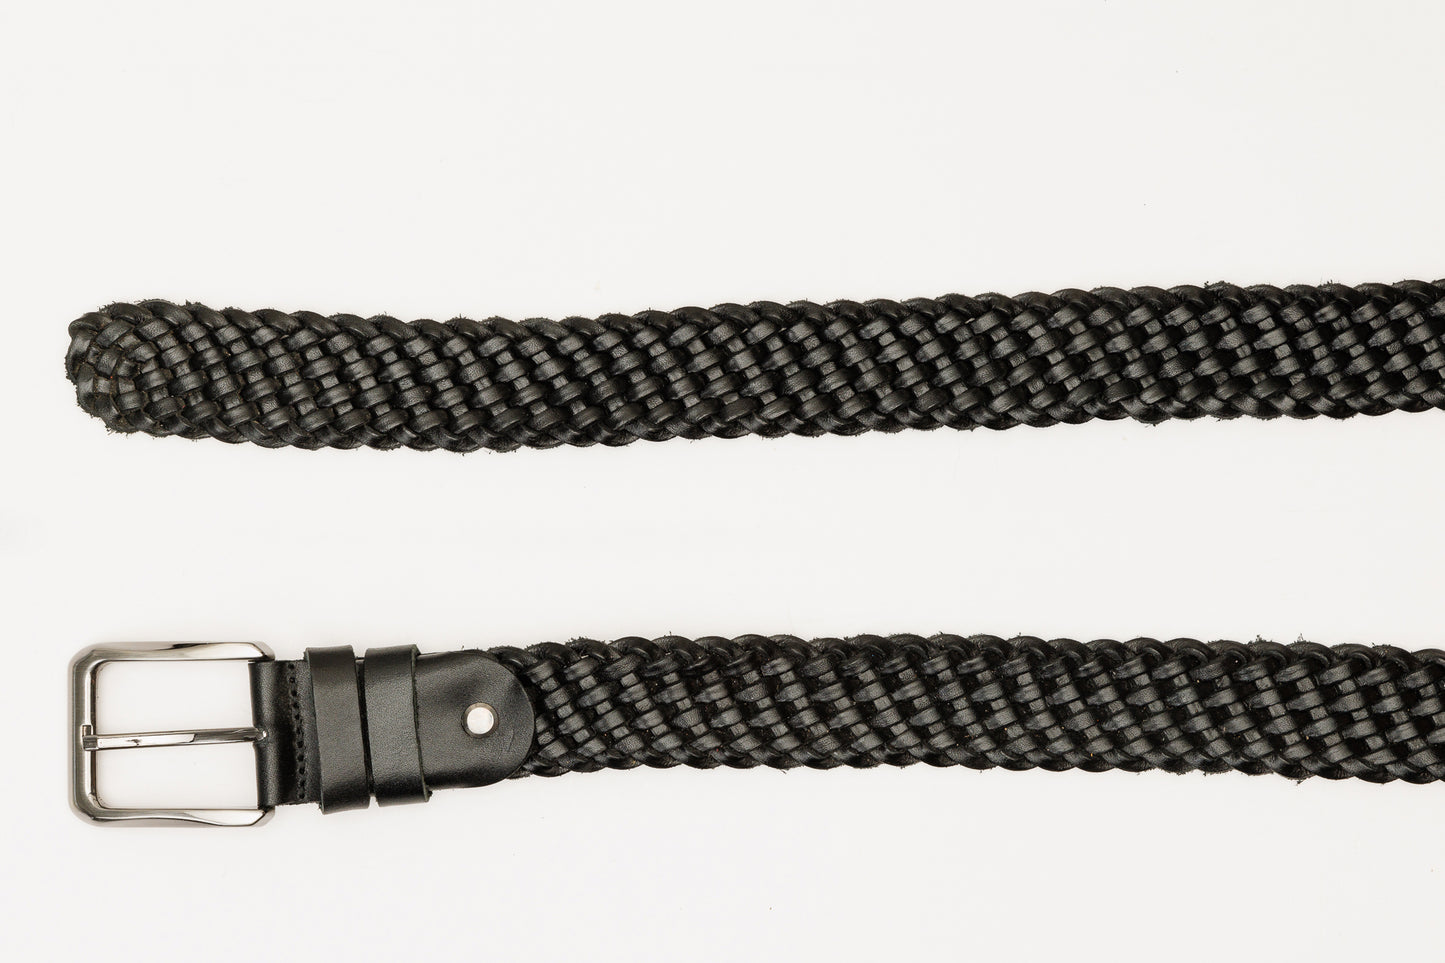 The Grand Woven Black Color Leather Belt